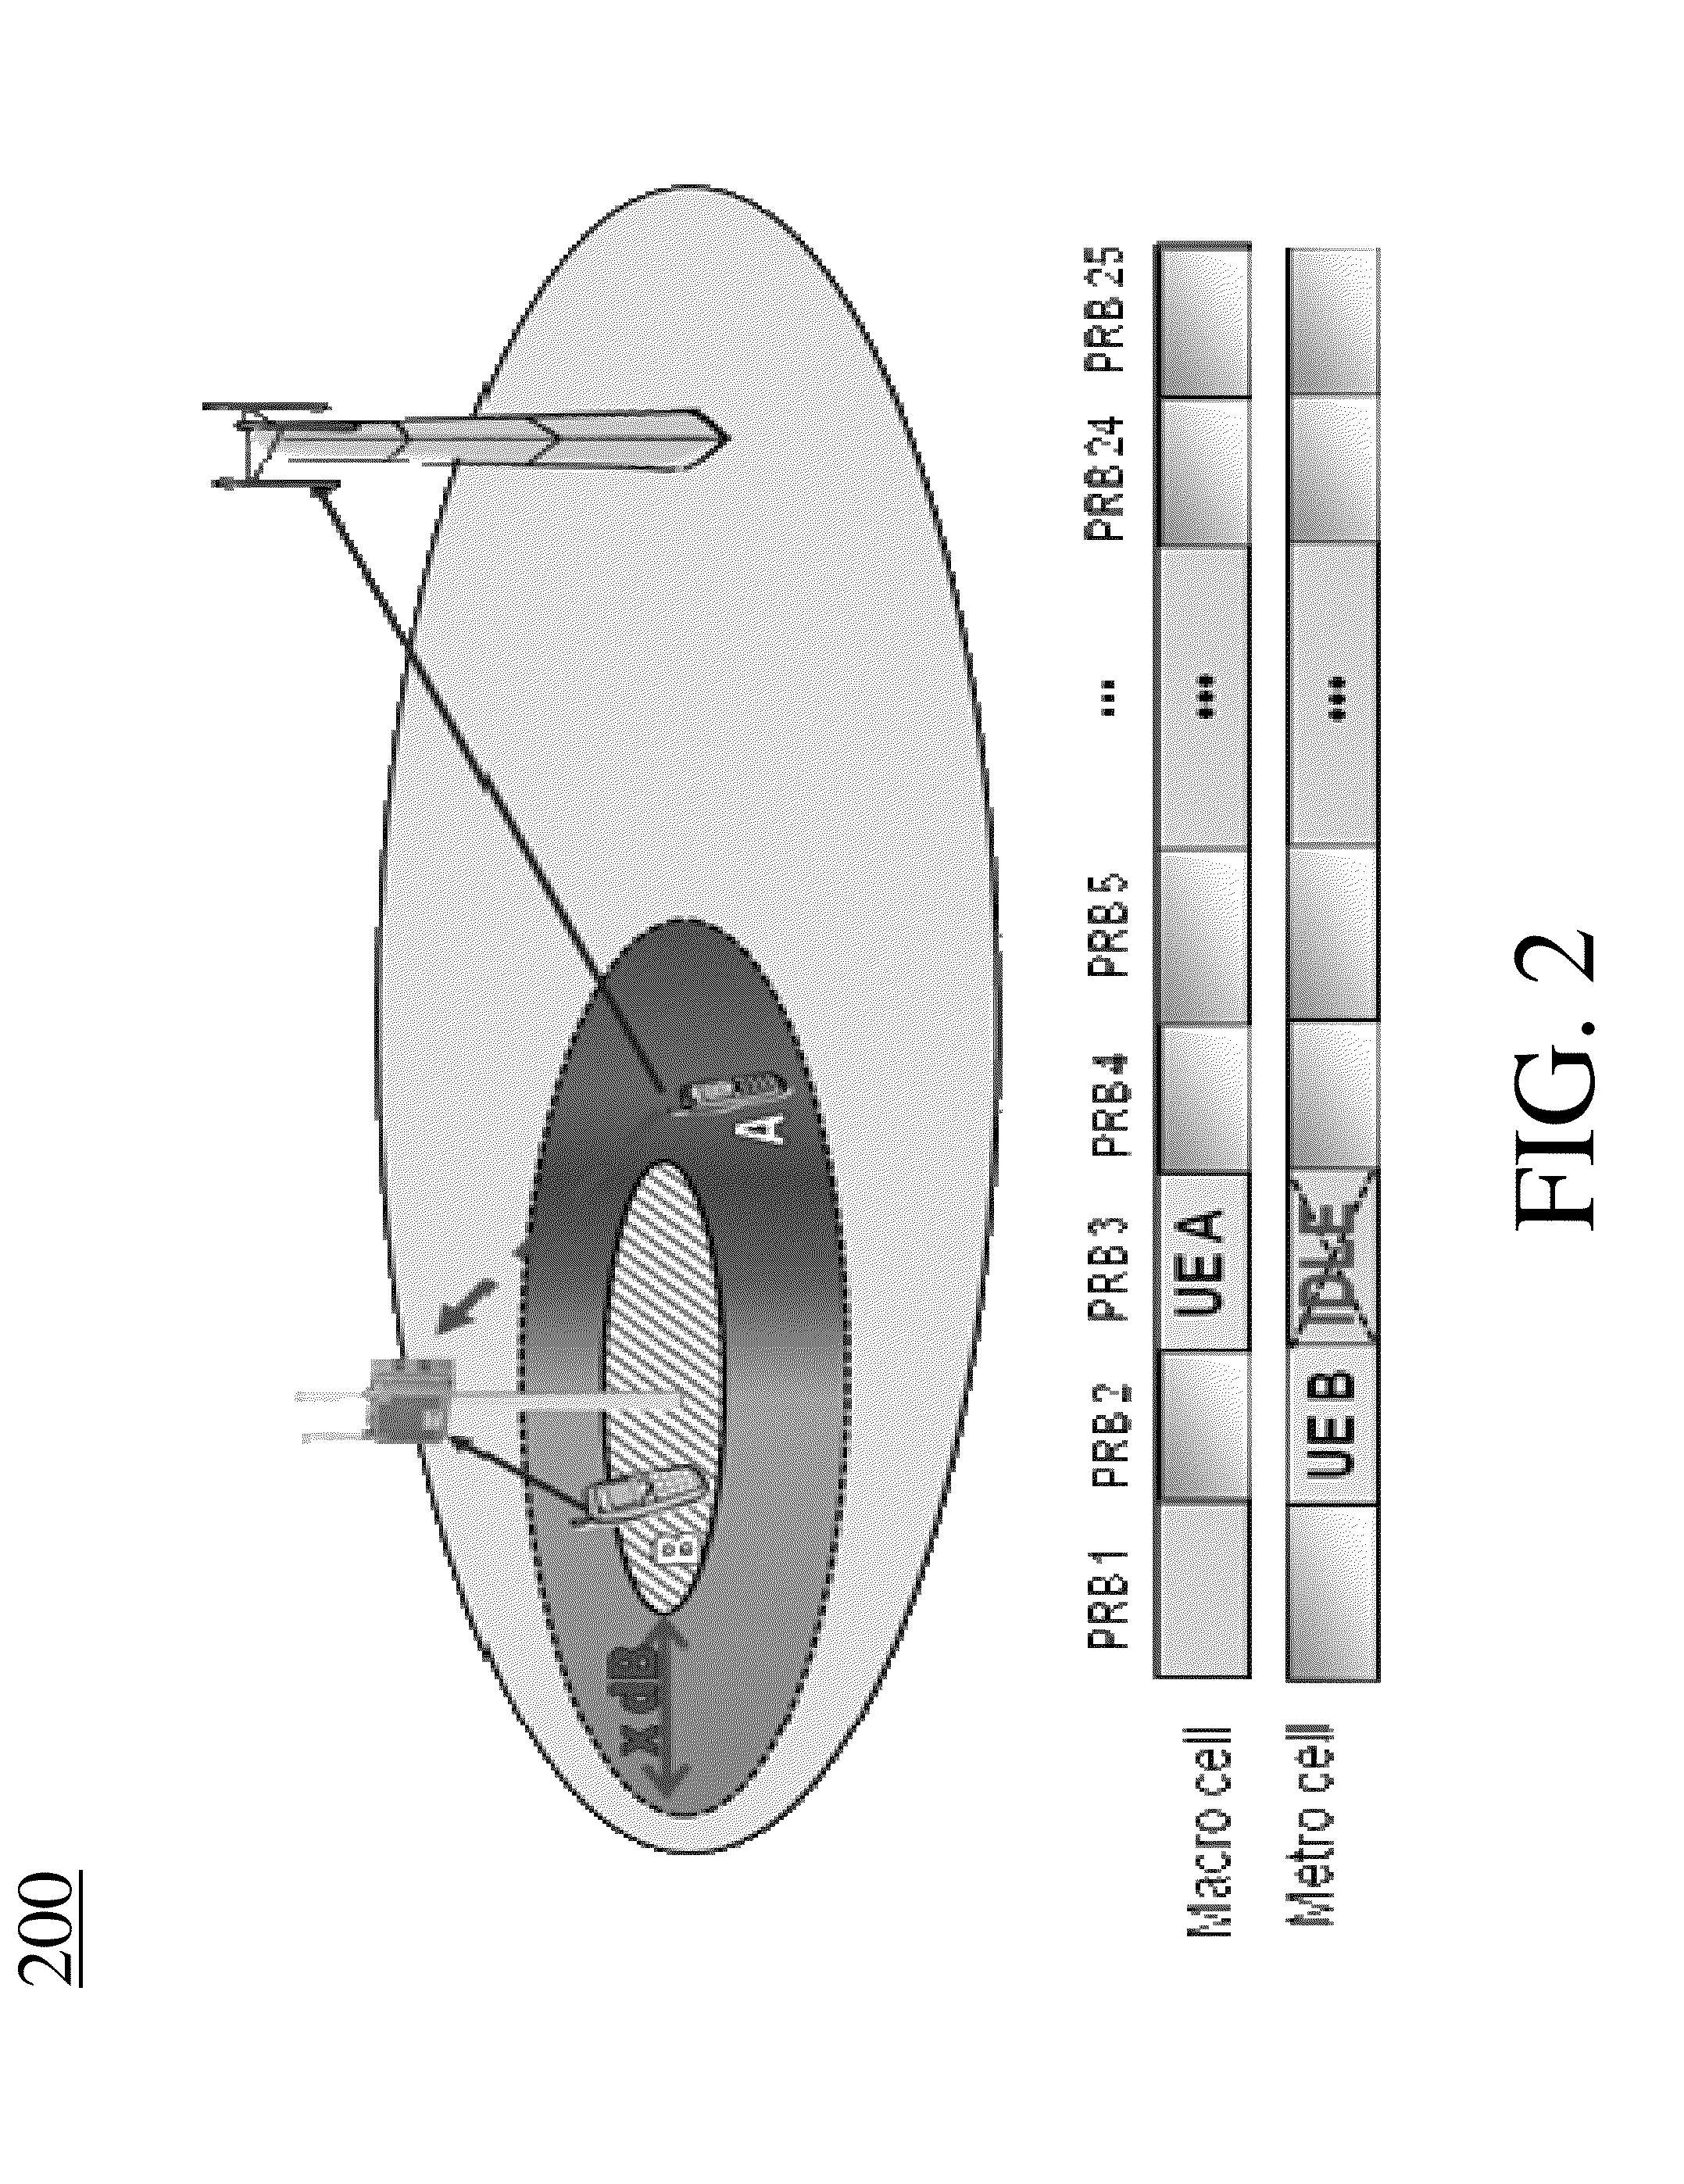 Method And Apparatus For Coordinated Uplink Scheduling